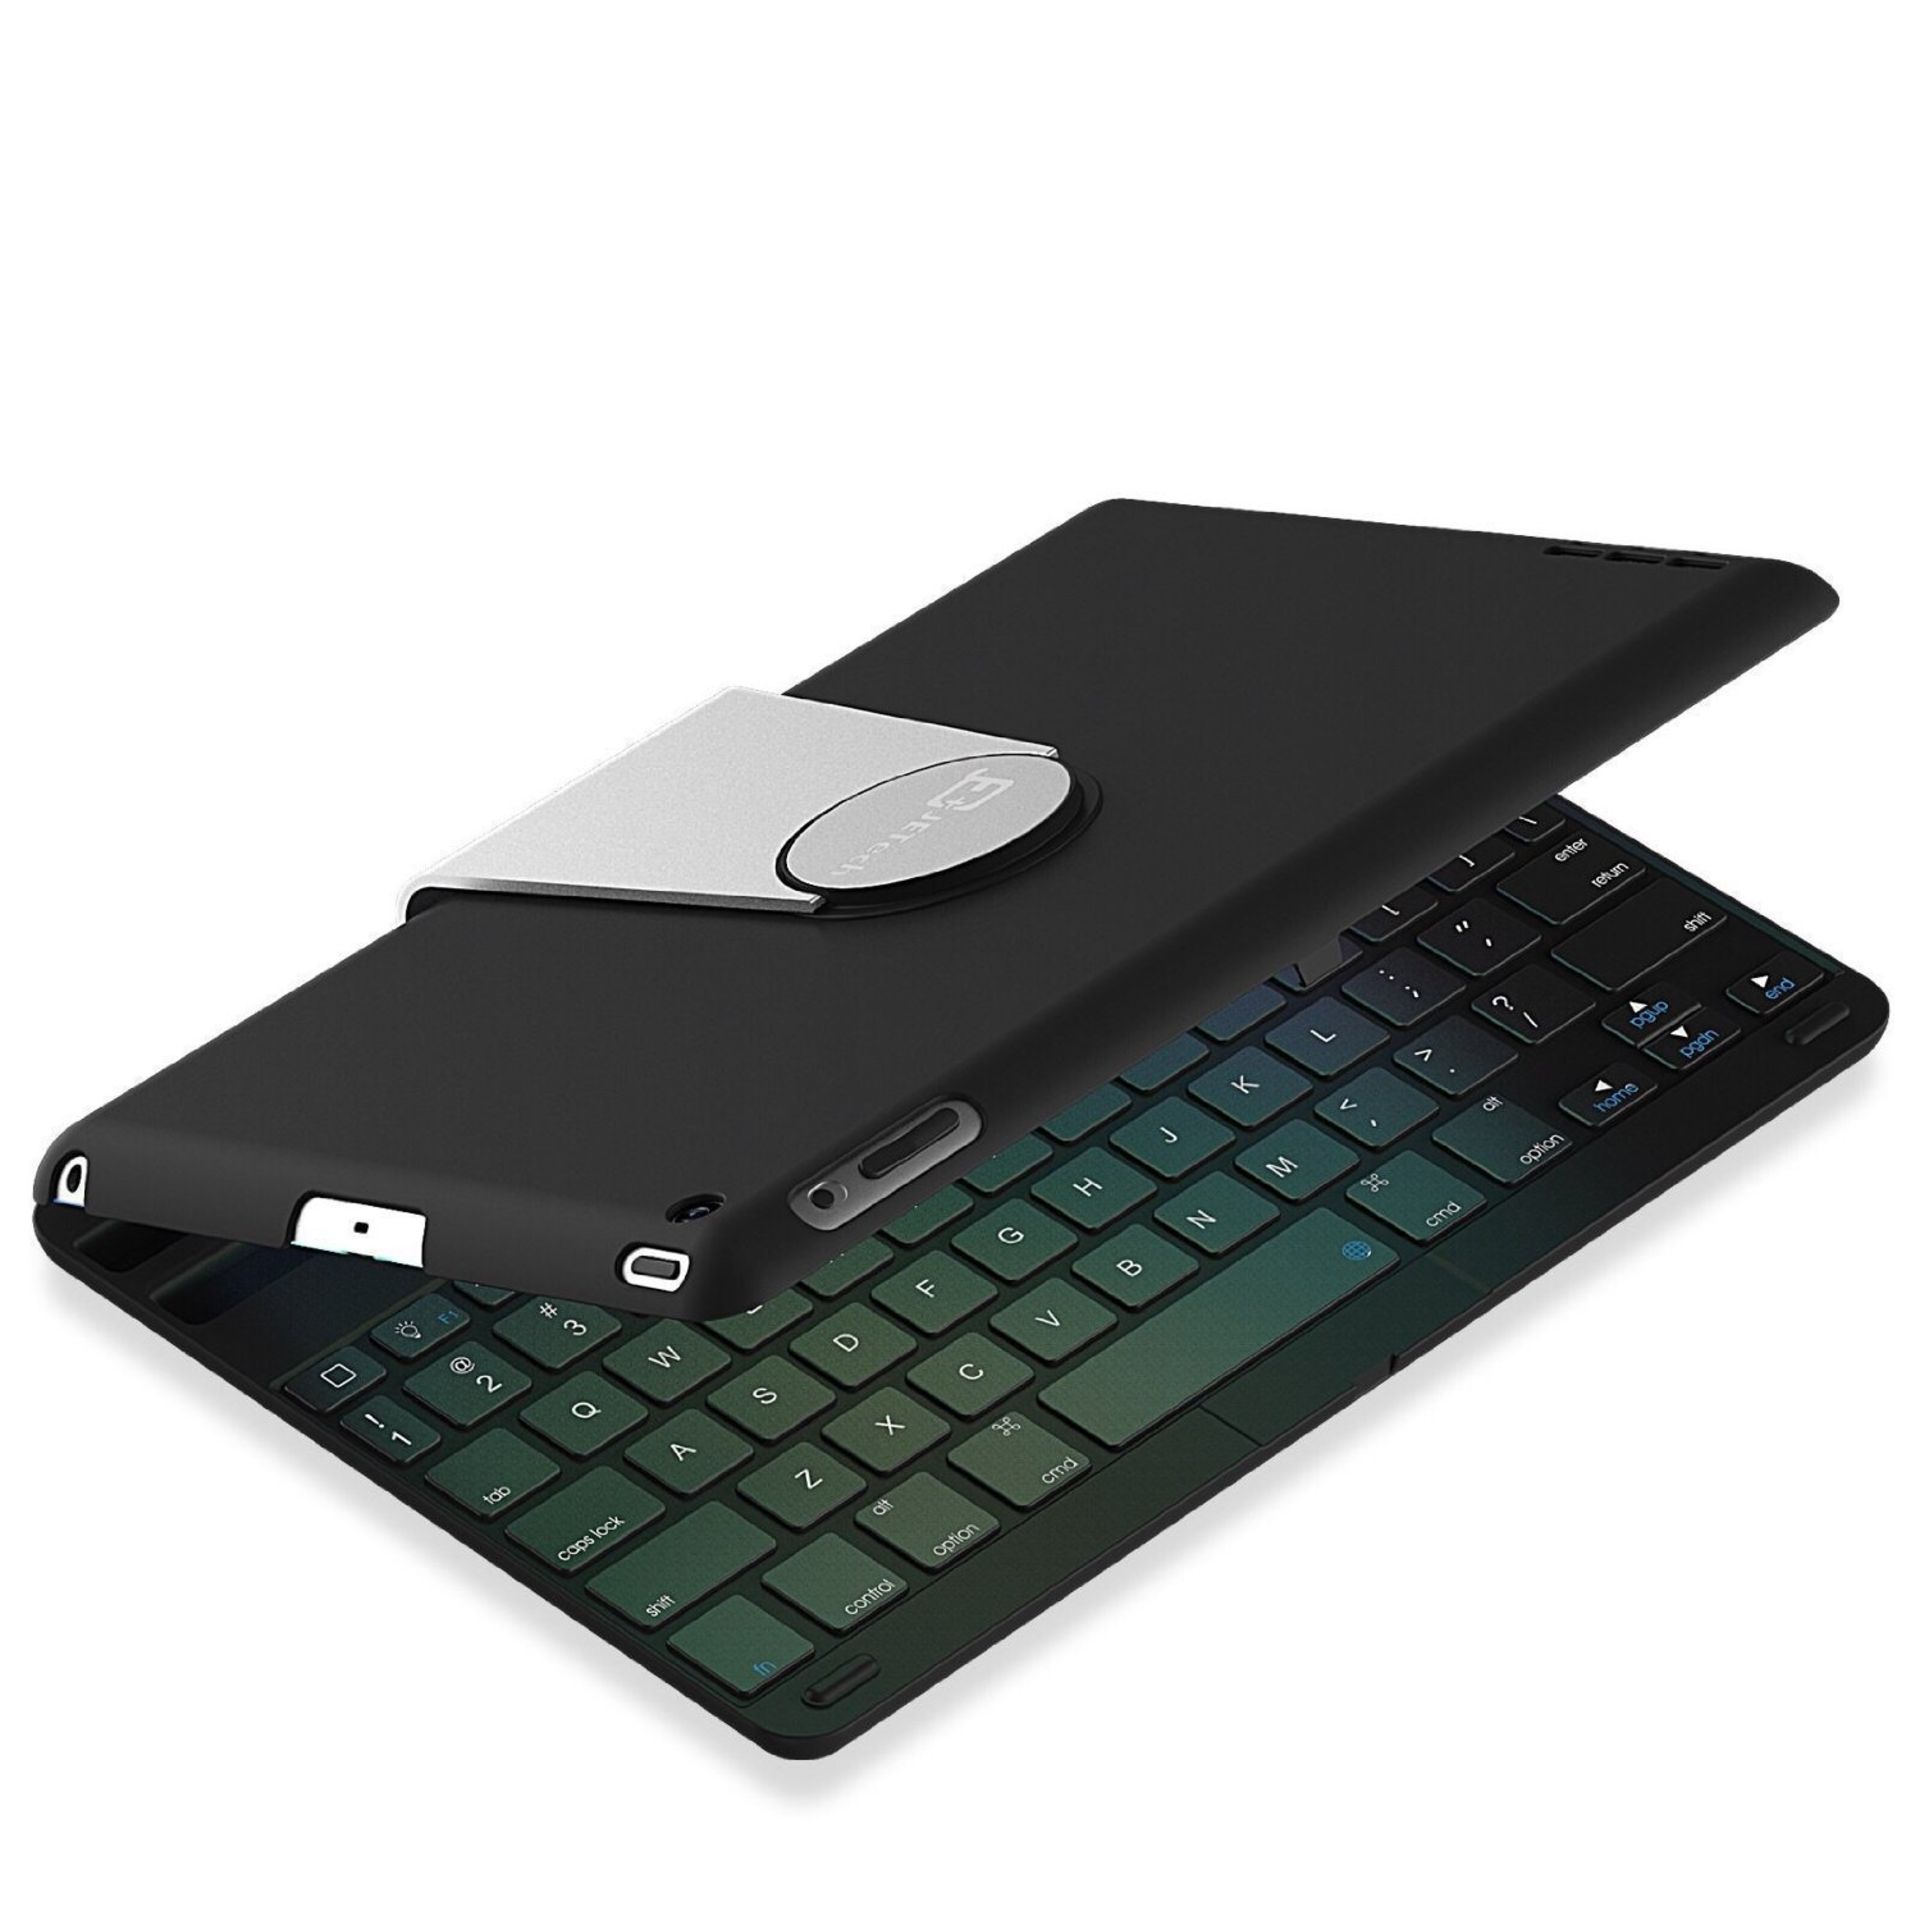 V Brand New Bluetooth Keyboard Case For Apple iPad Air 1 - Amazon Price £24.95 X 2 YOUR BID PRICE TO